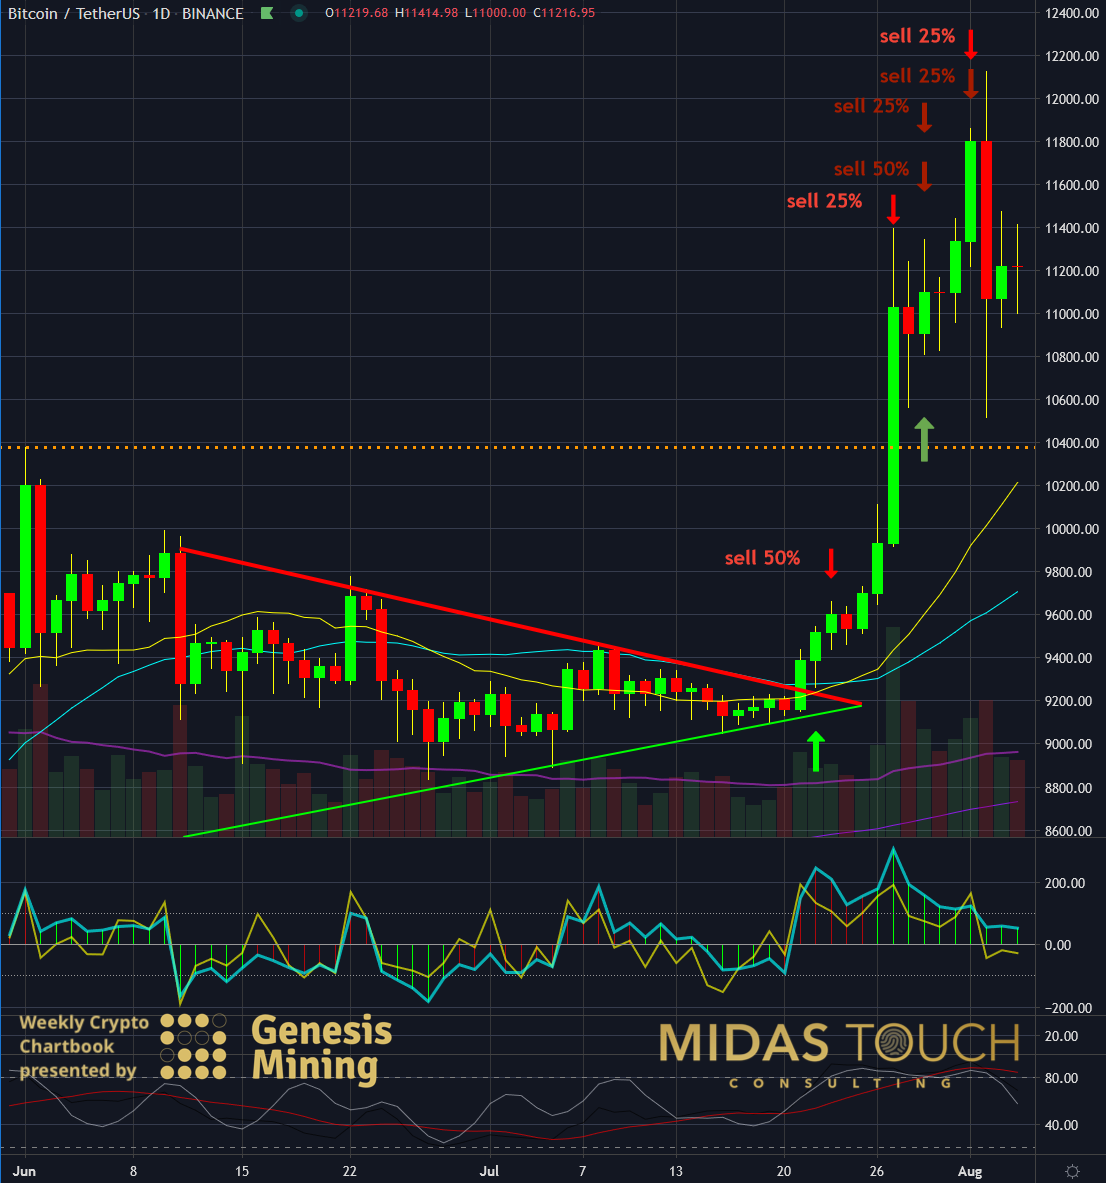 BTC-USDT, daily chart as of August 4th, 2020